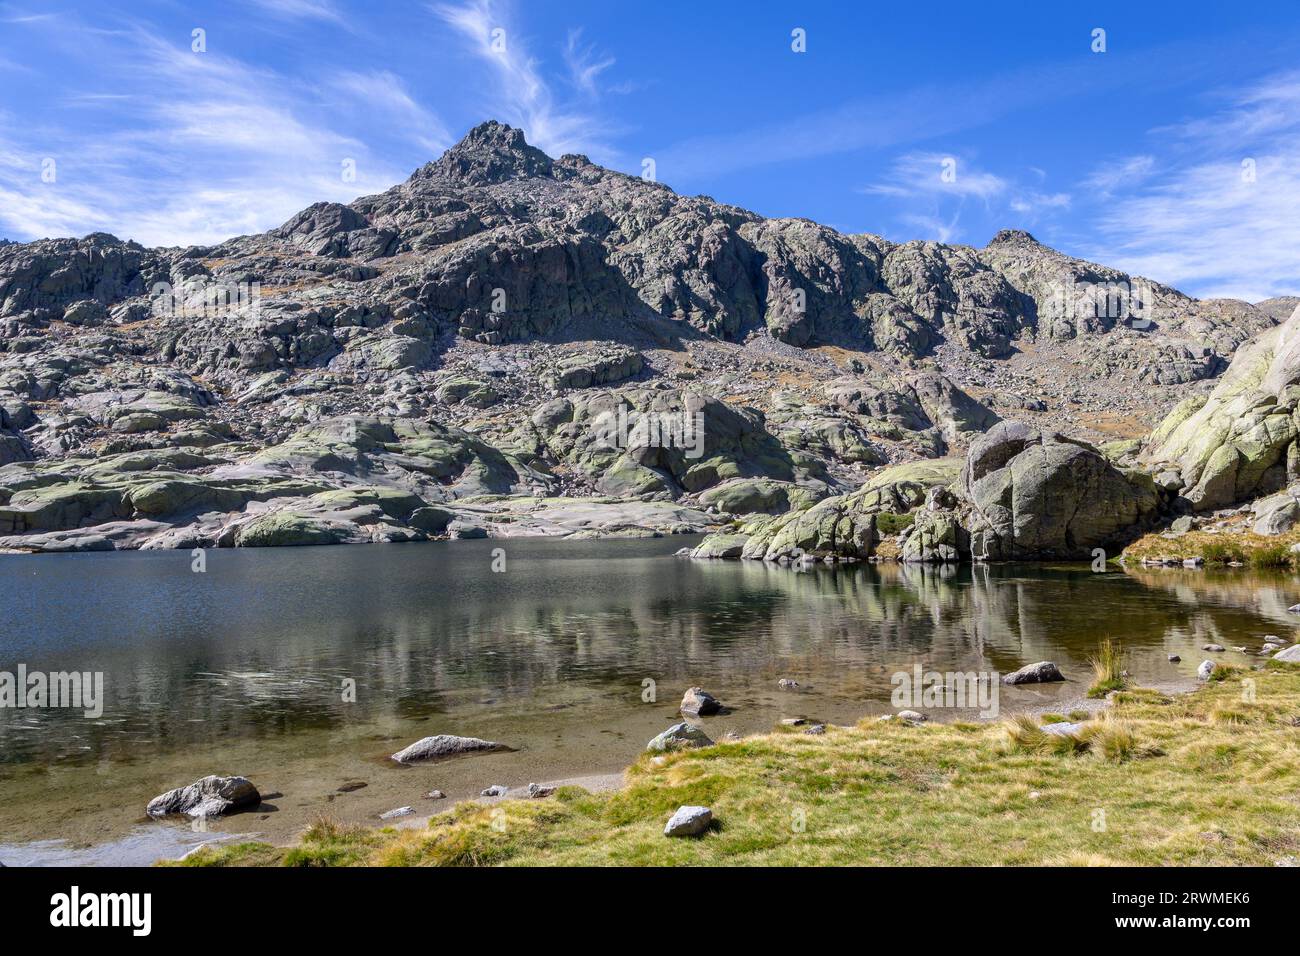 Laguna Grande de Gredos in Sierra de Gredos, landscape with high rocky mountains in the background, autumn view. Stock Photo